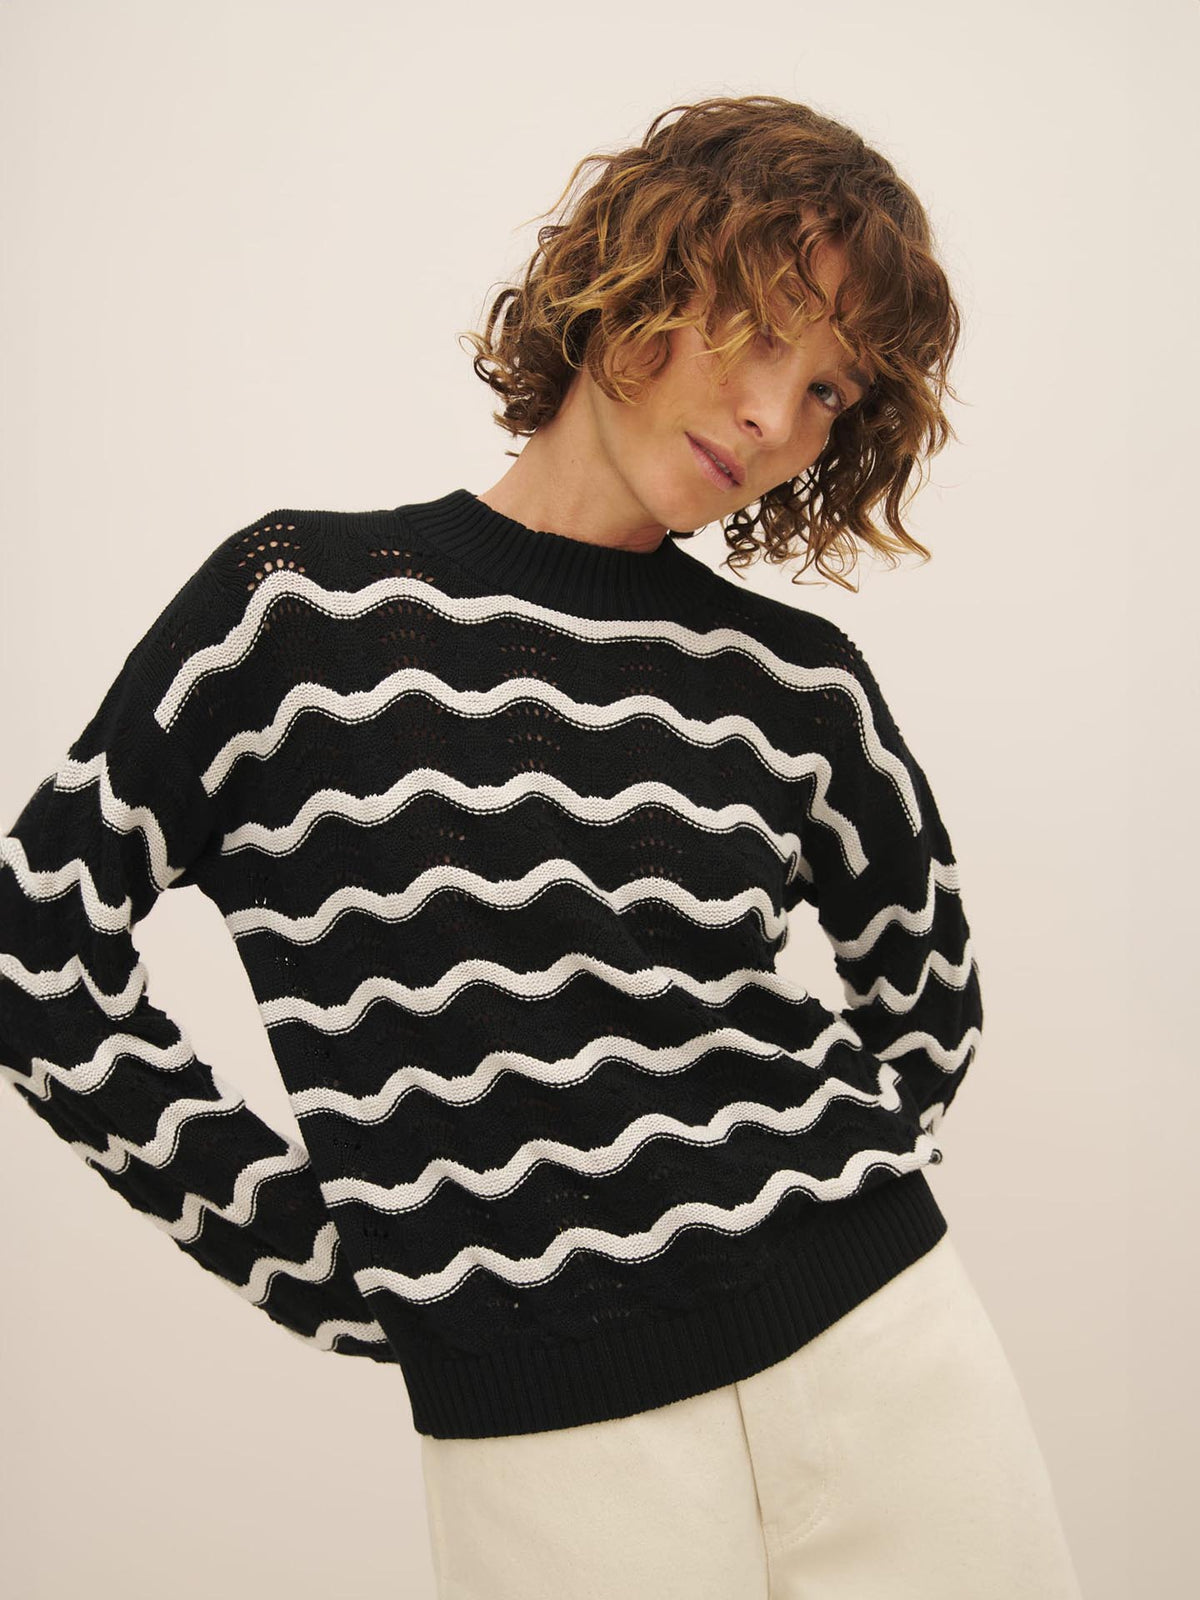 Person with curly hair posing in a black and white striped Tide Jumper made of Fairtrade organic cotton by Kowtow.